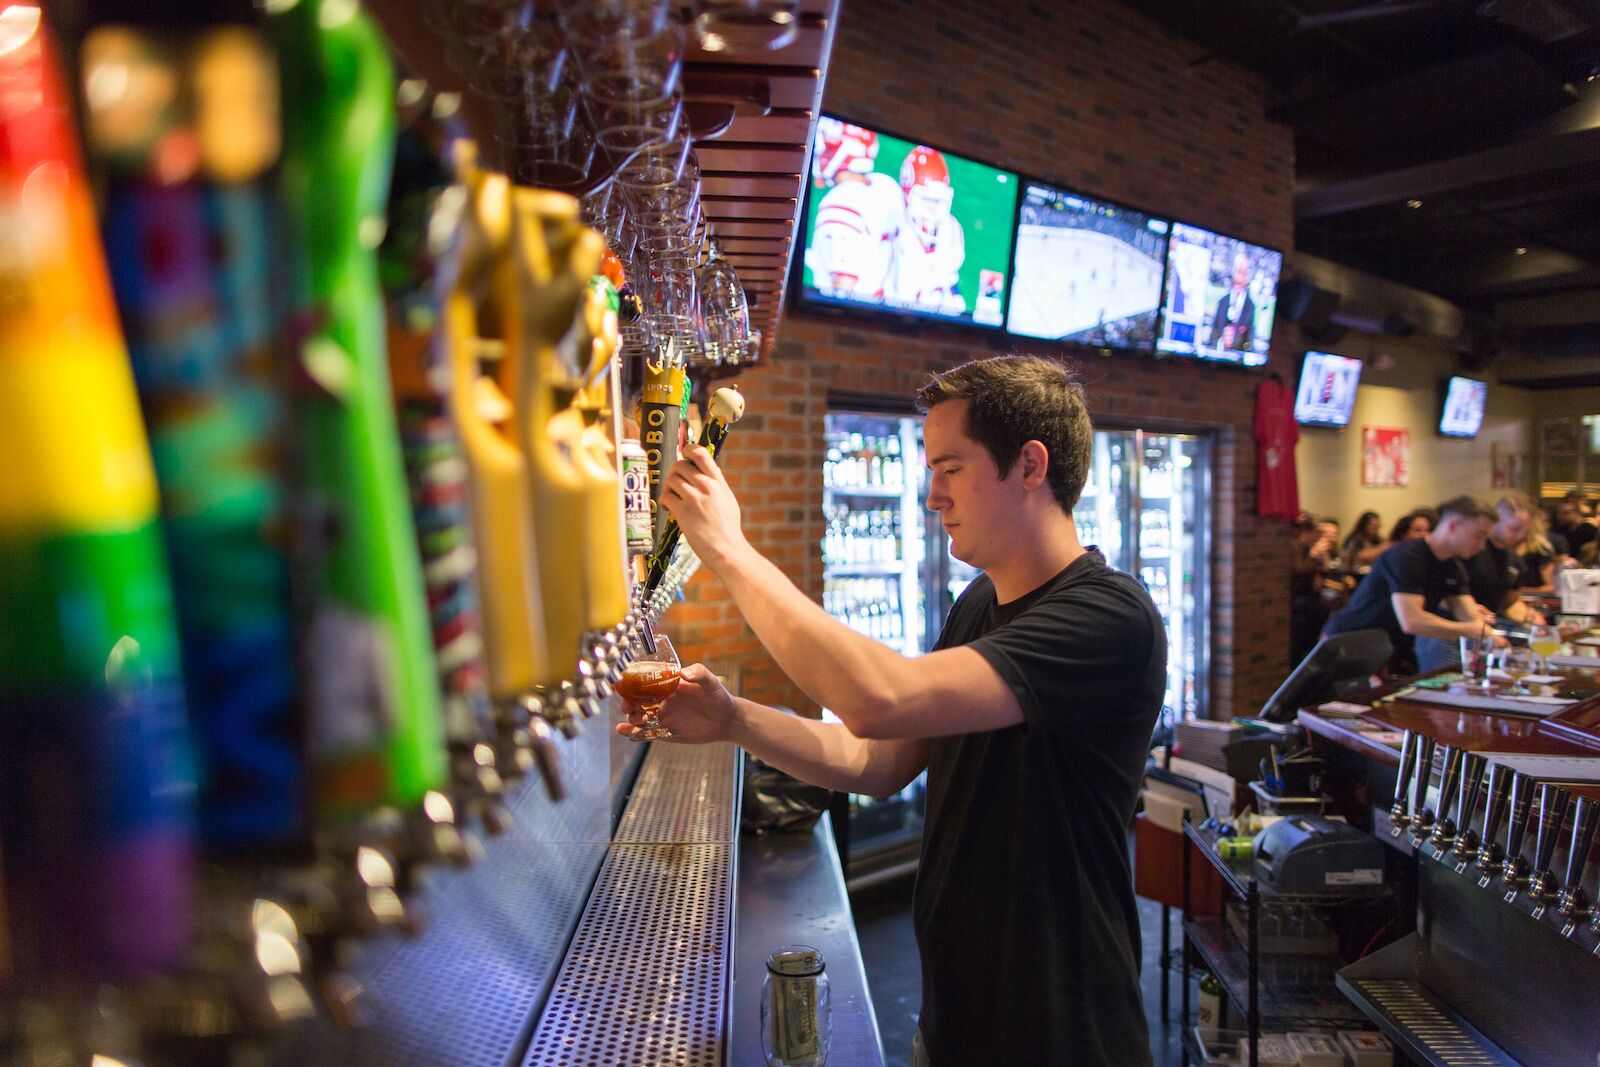 The Tap-bloomington-indiana-sports-bars